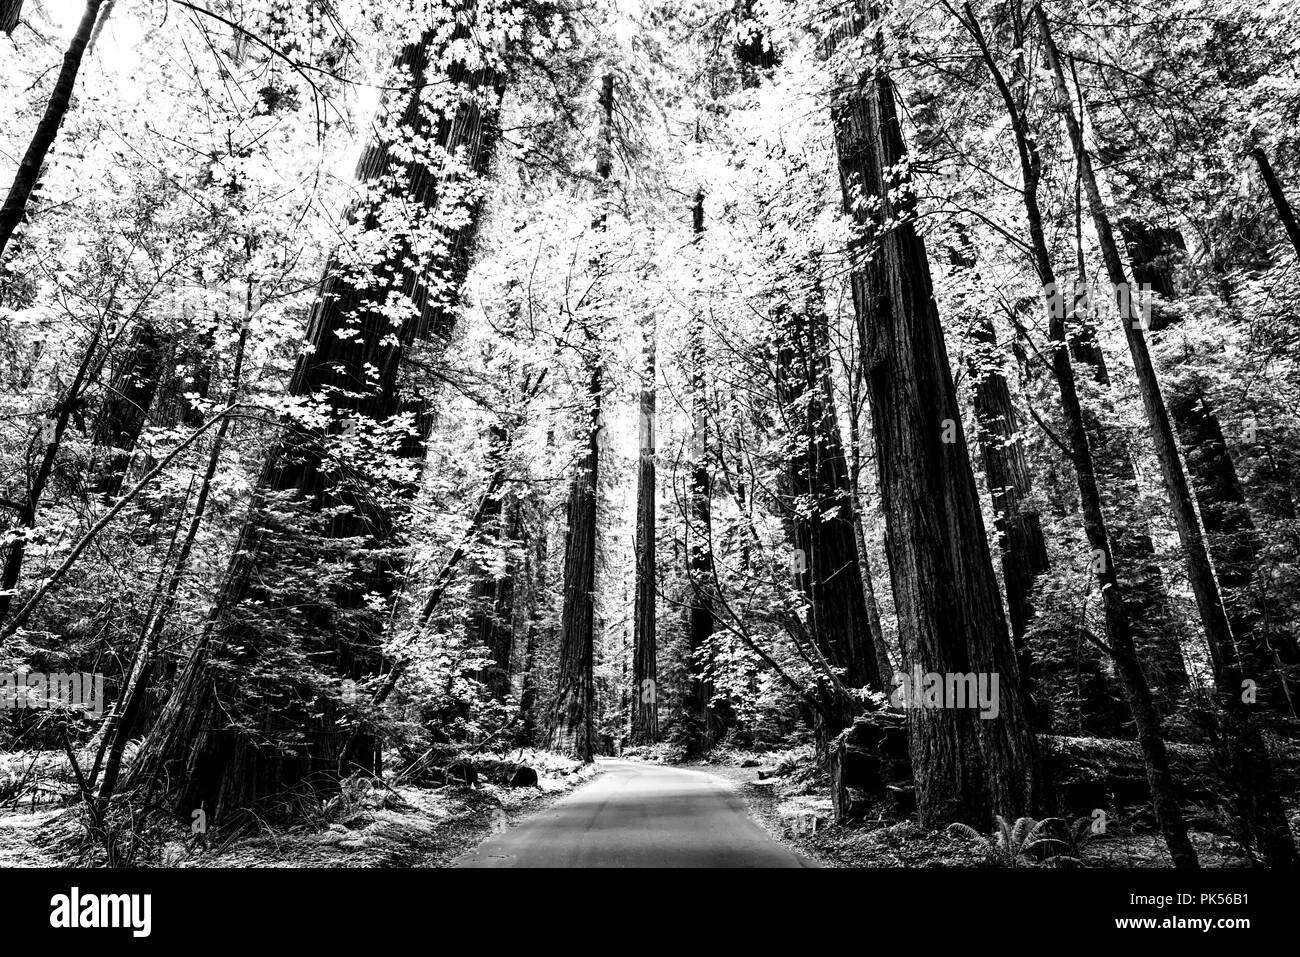 Road running through the Founder's Grove forest in Humboldt Redwoods State Park, Humboldt County,  California, USA. Stock Photo